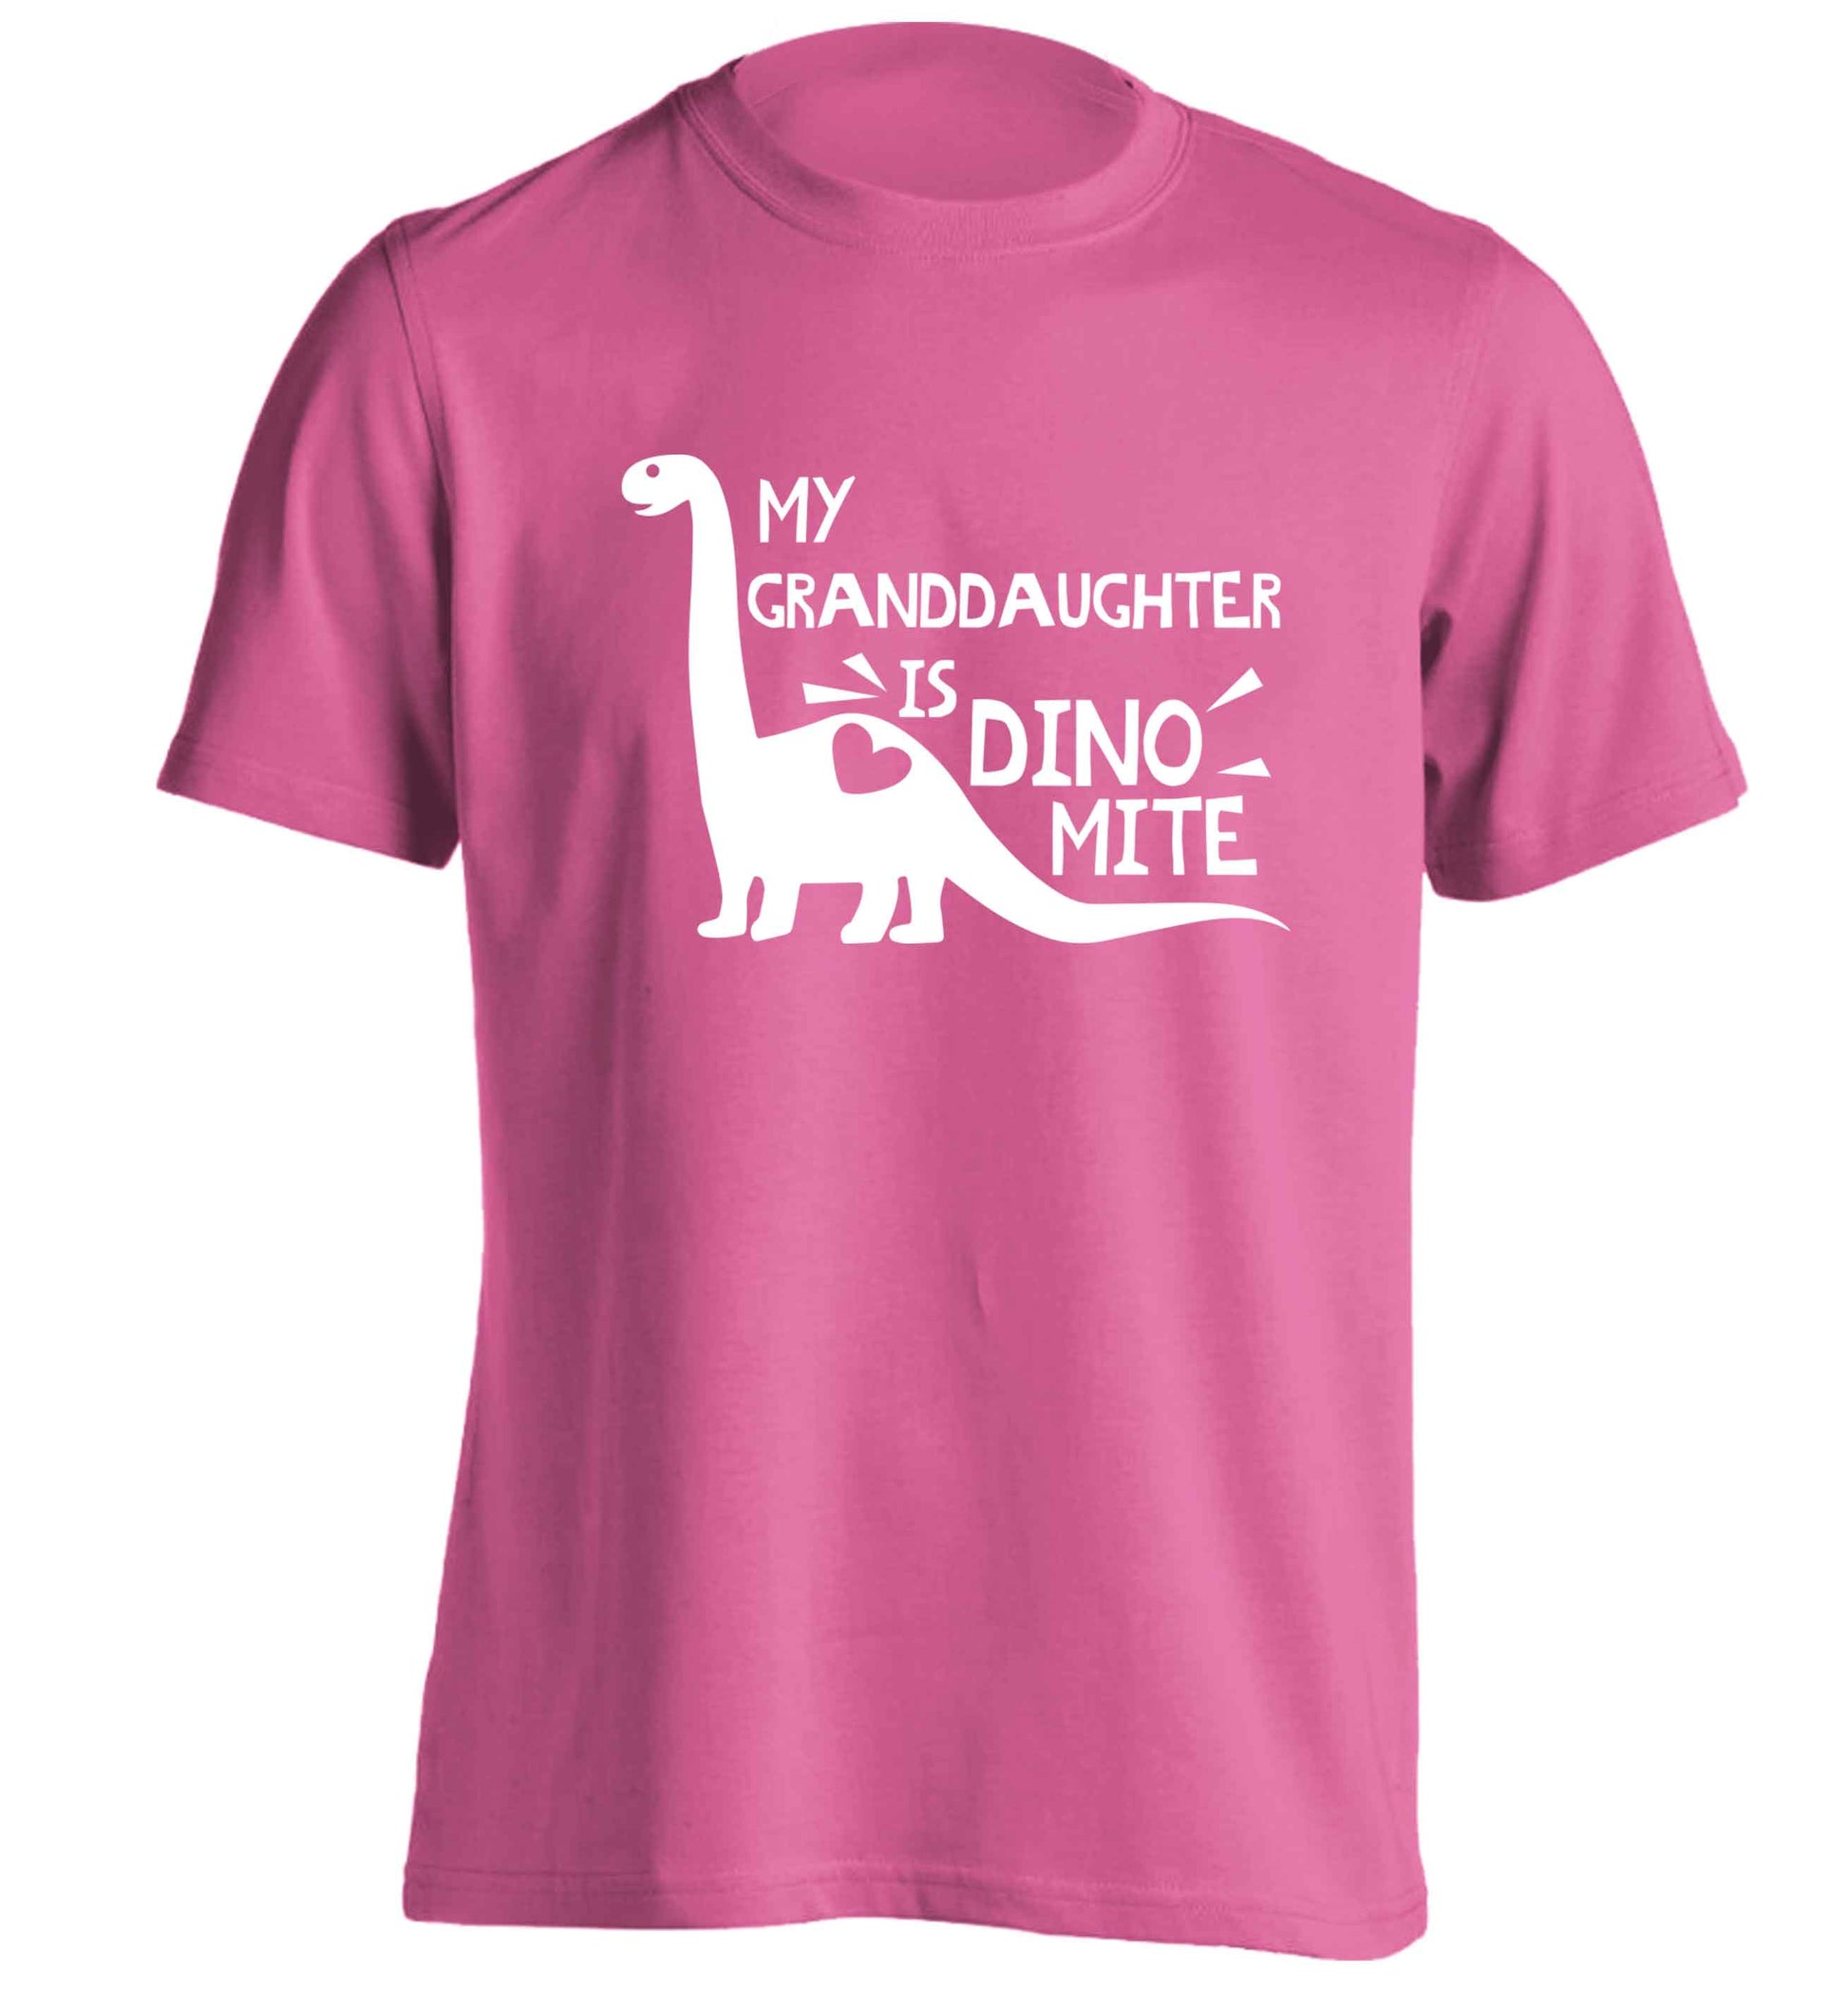 My granddaughter is dinomite! adults unisex pink Tshirt 2XL